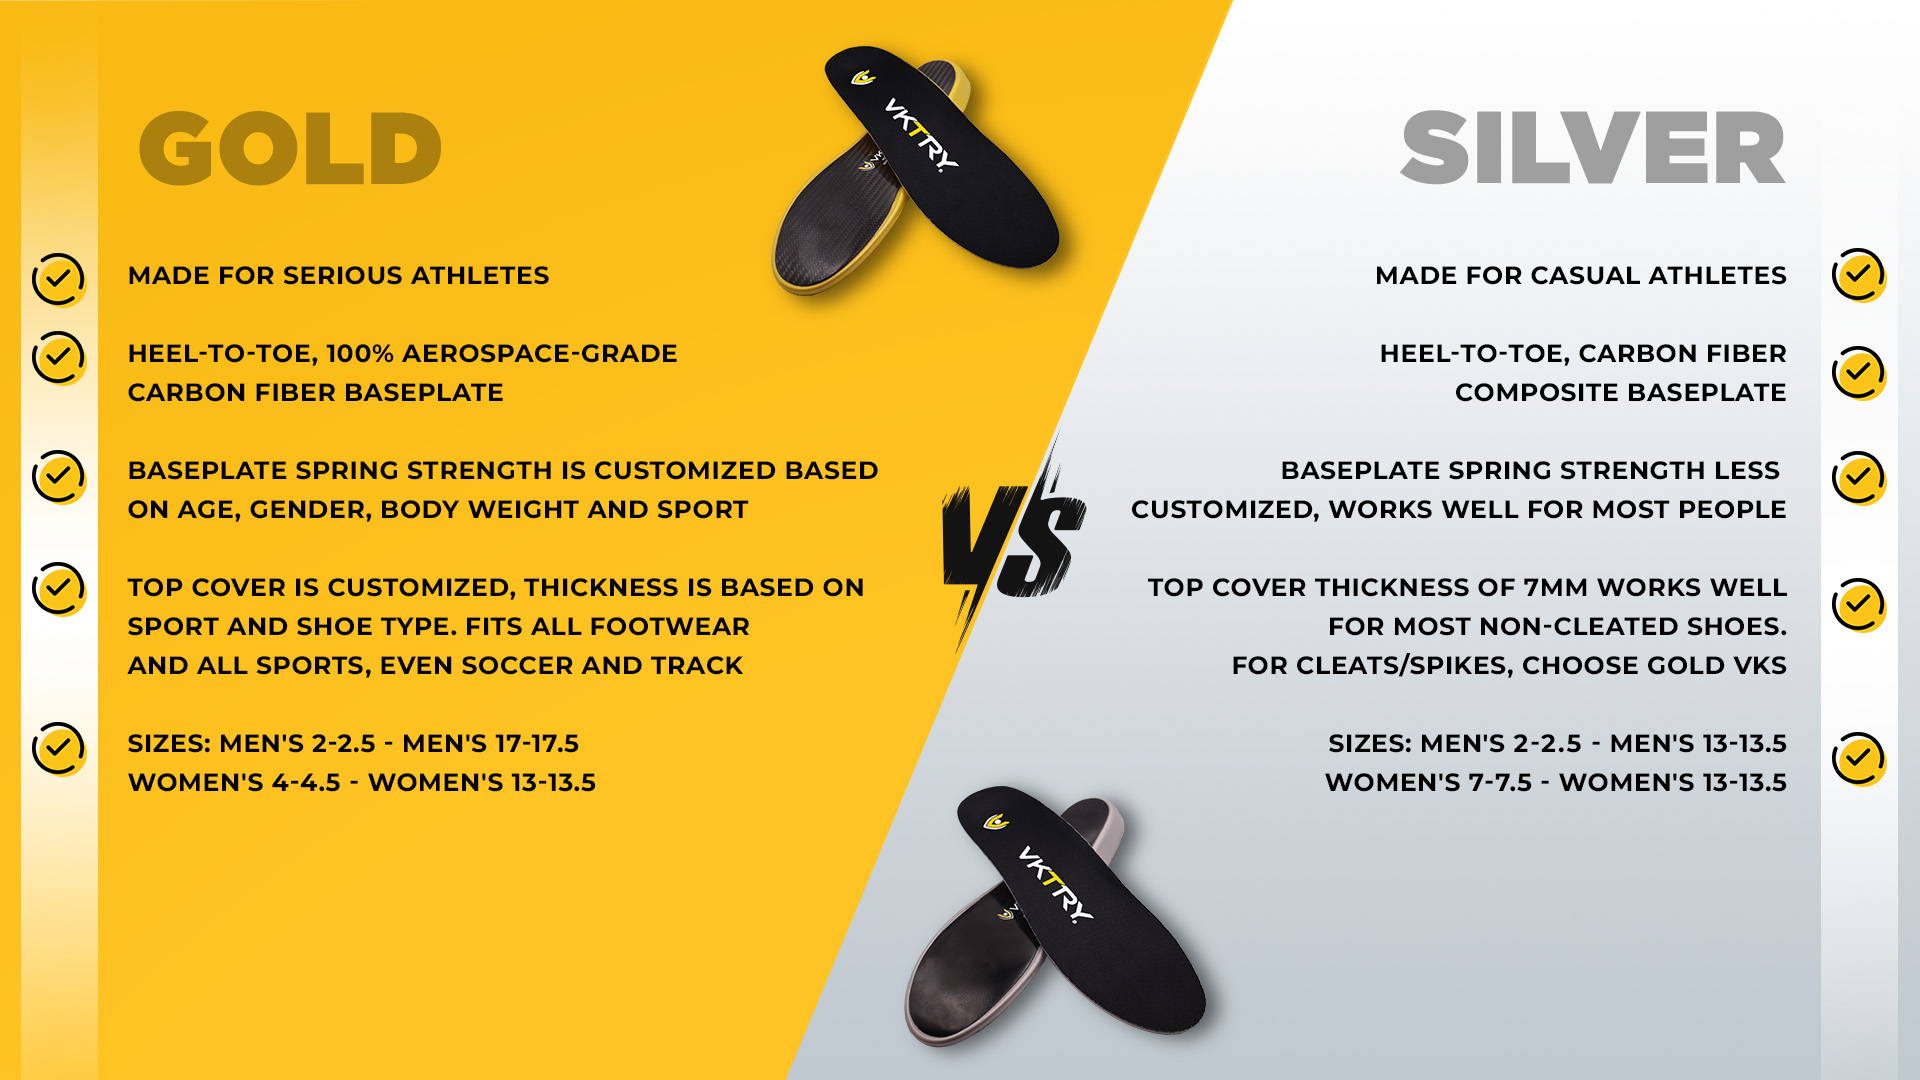 VKTRY gold vs silver Insoles, Difference between gold and silver insoles